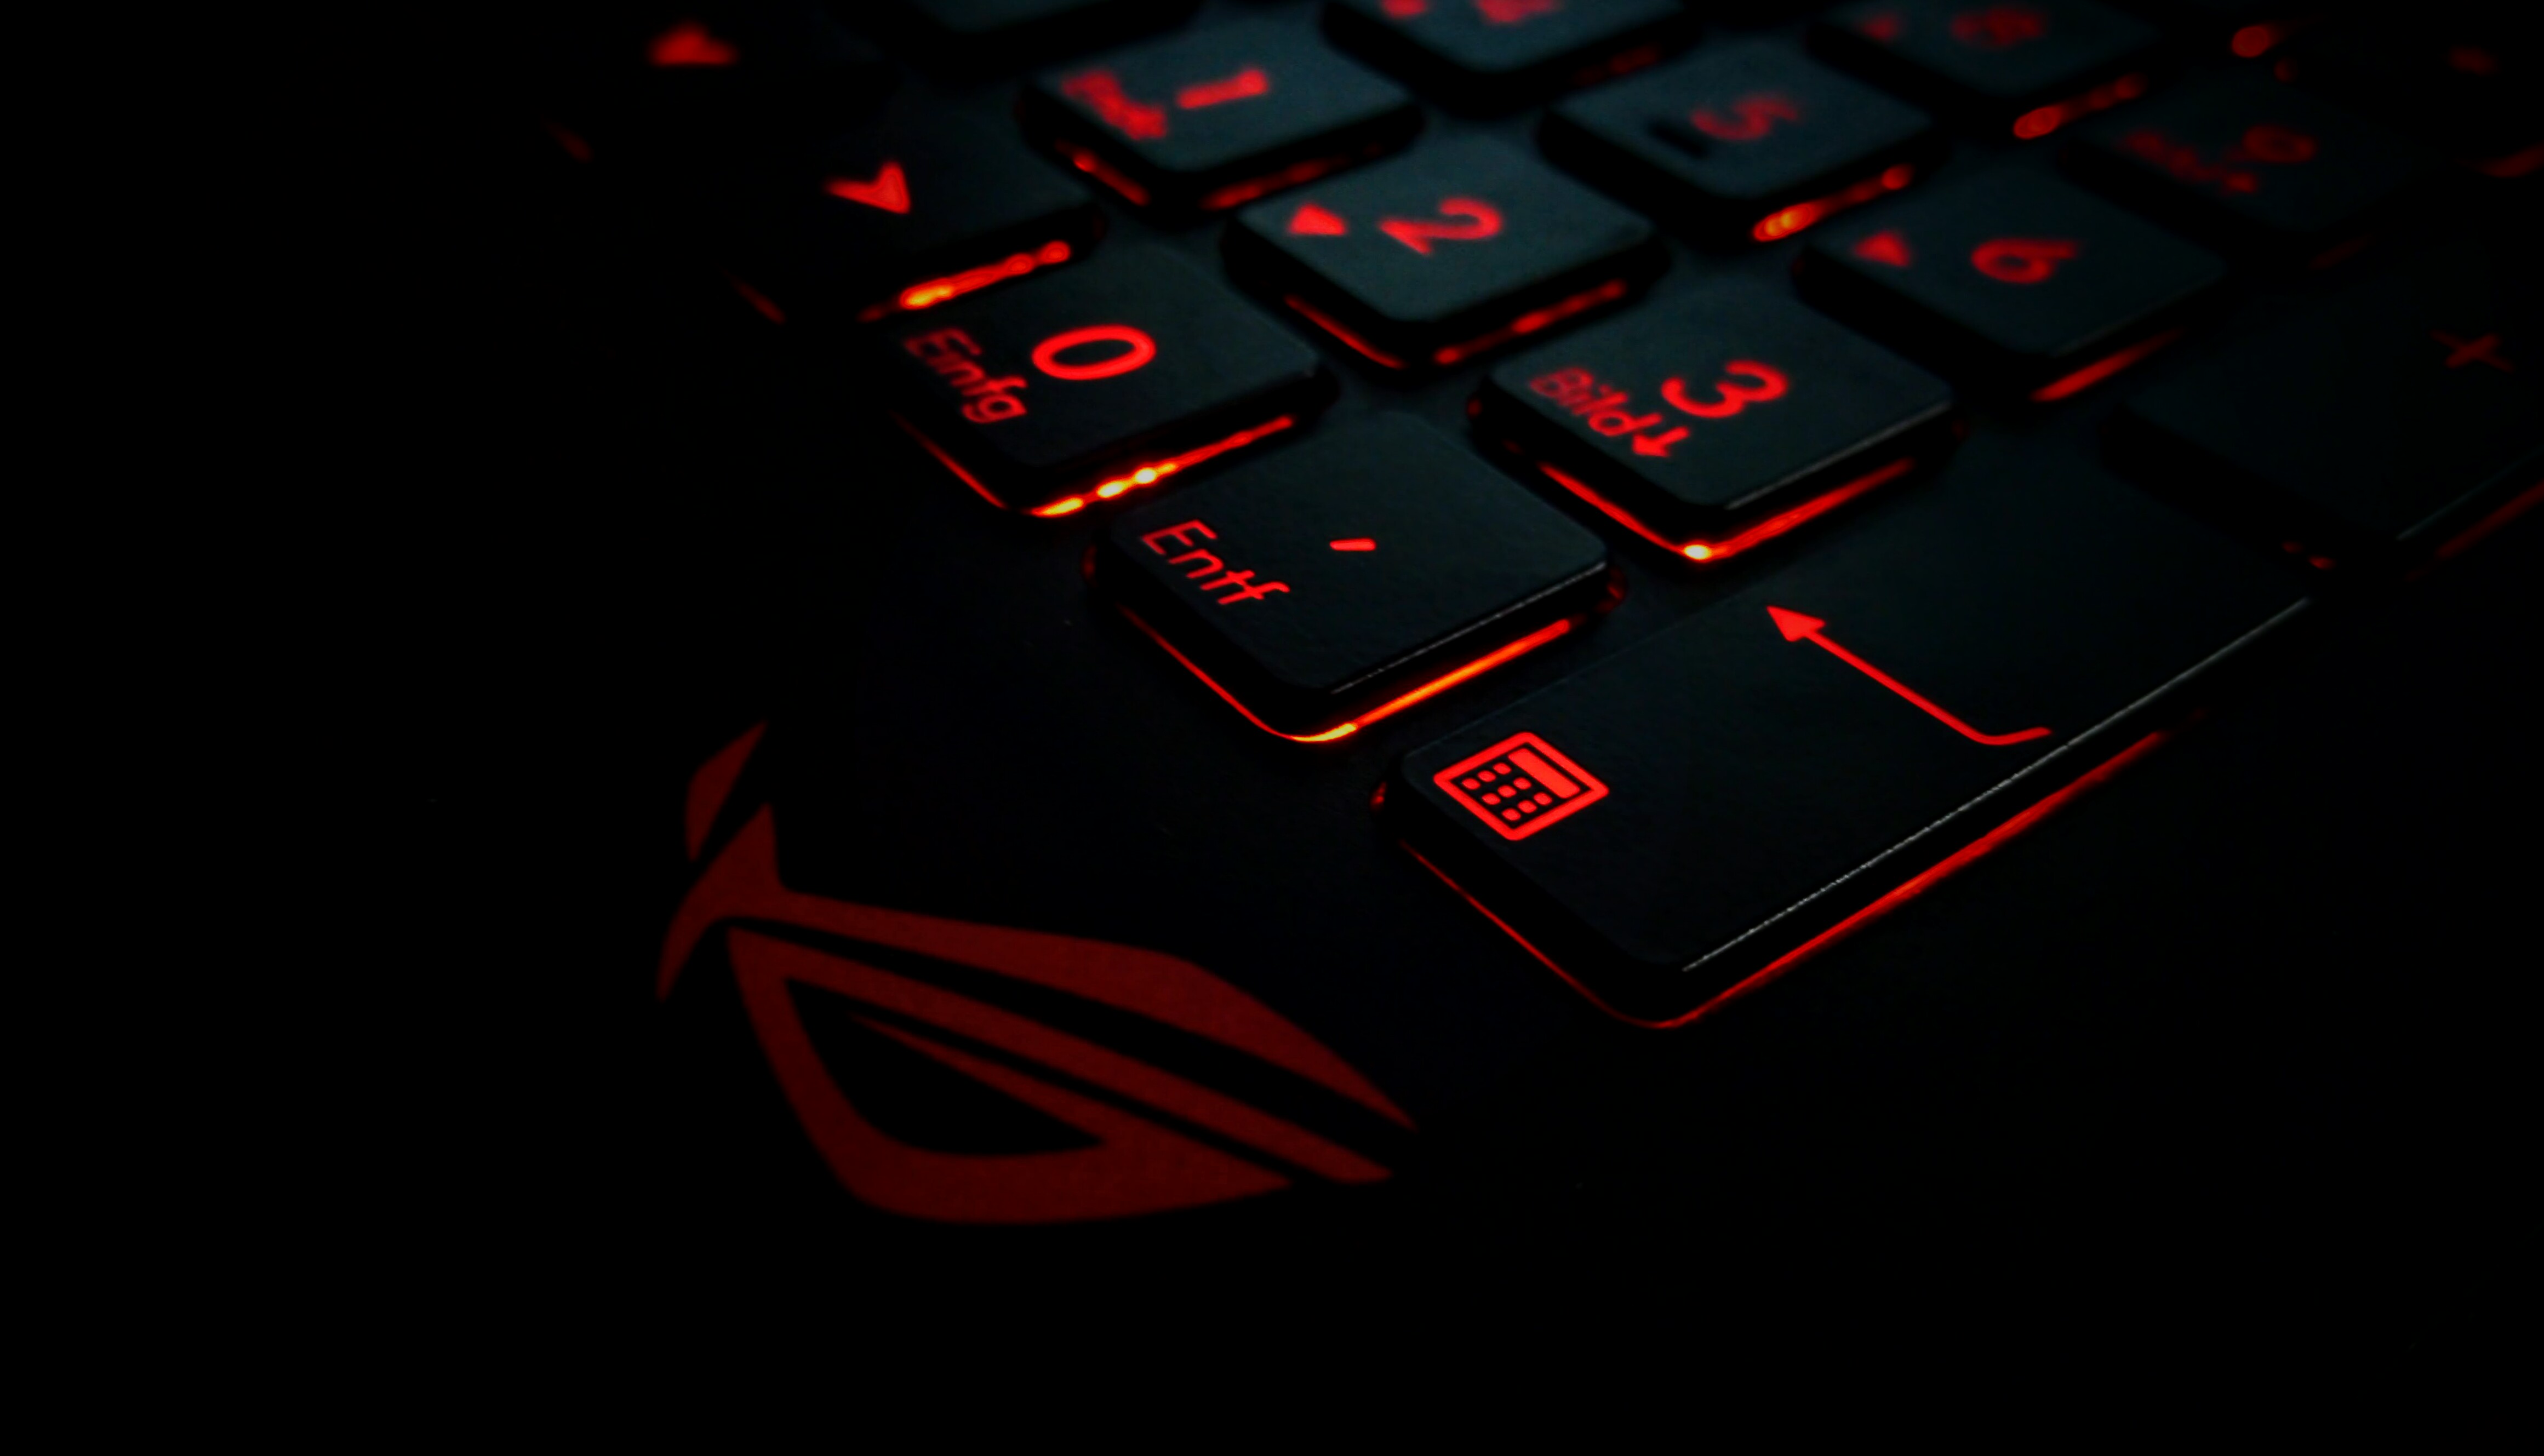 General 4643x2658 Republic of Gamers keyboards red brand low light closeup ASUS